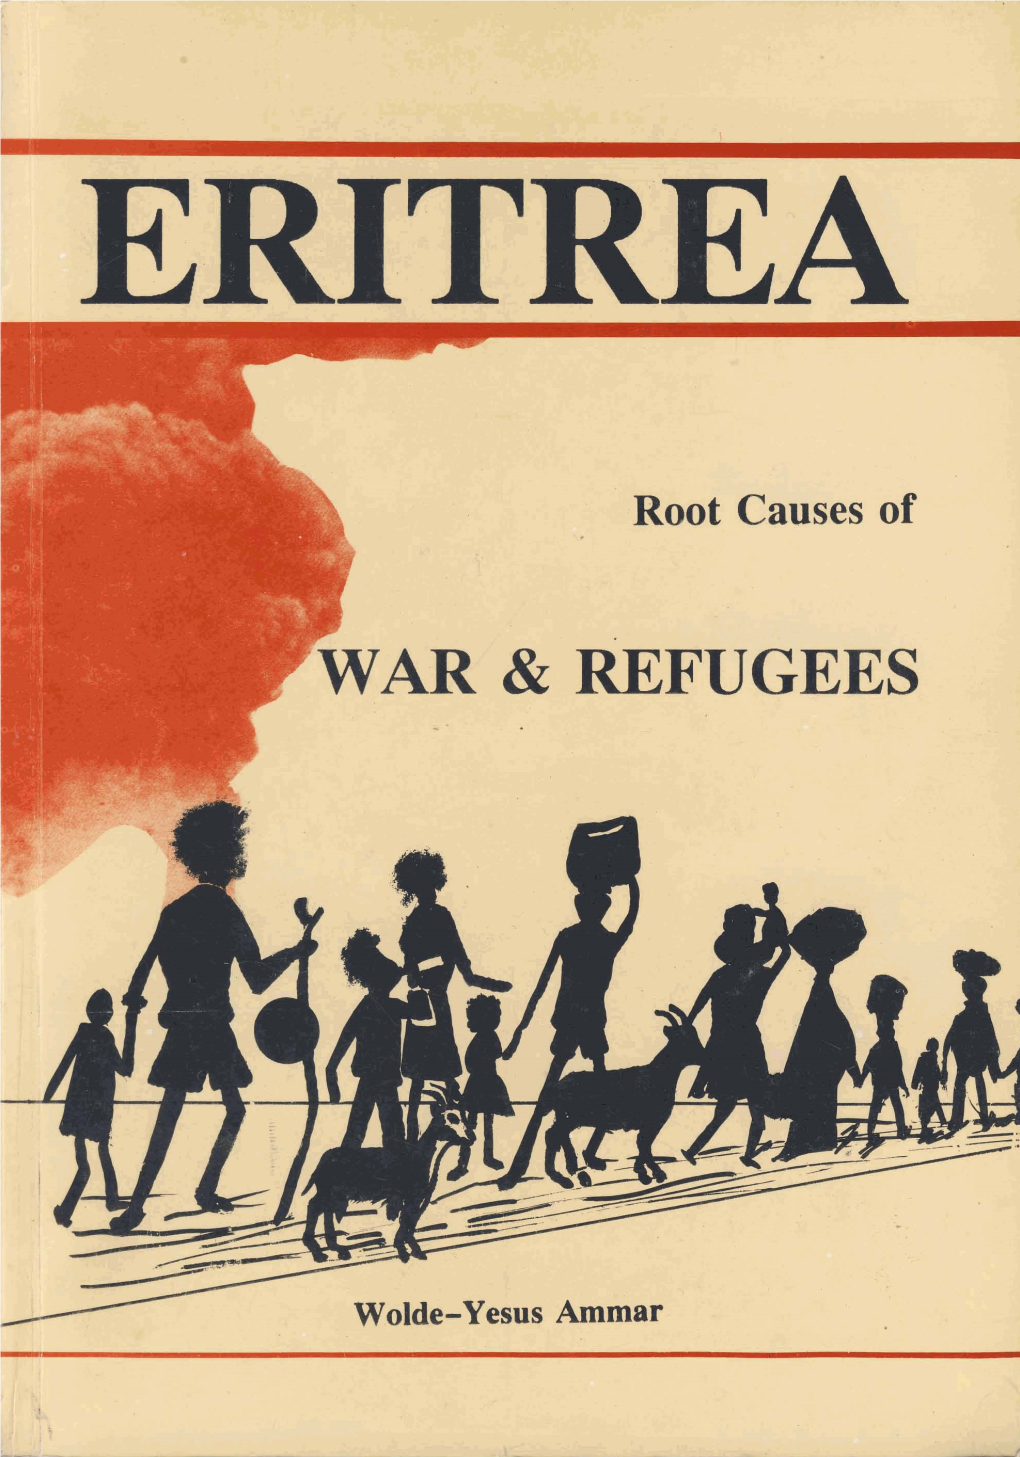 Woldeyesus Ammar, 1992. Eritrea, Root Causes of War and Refugees